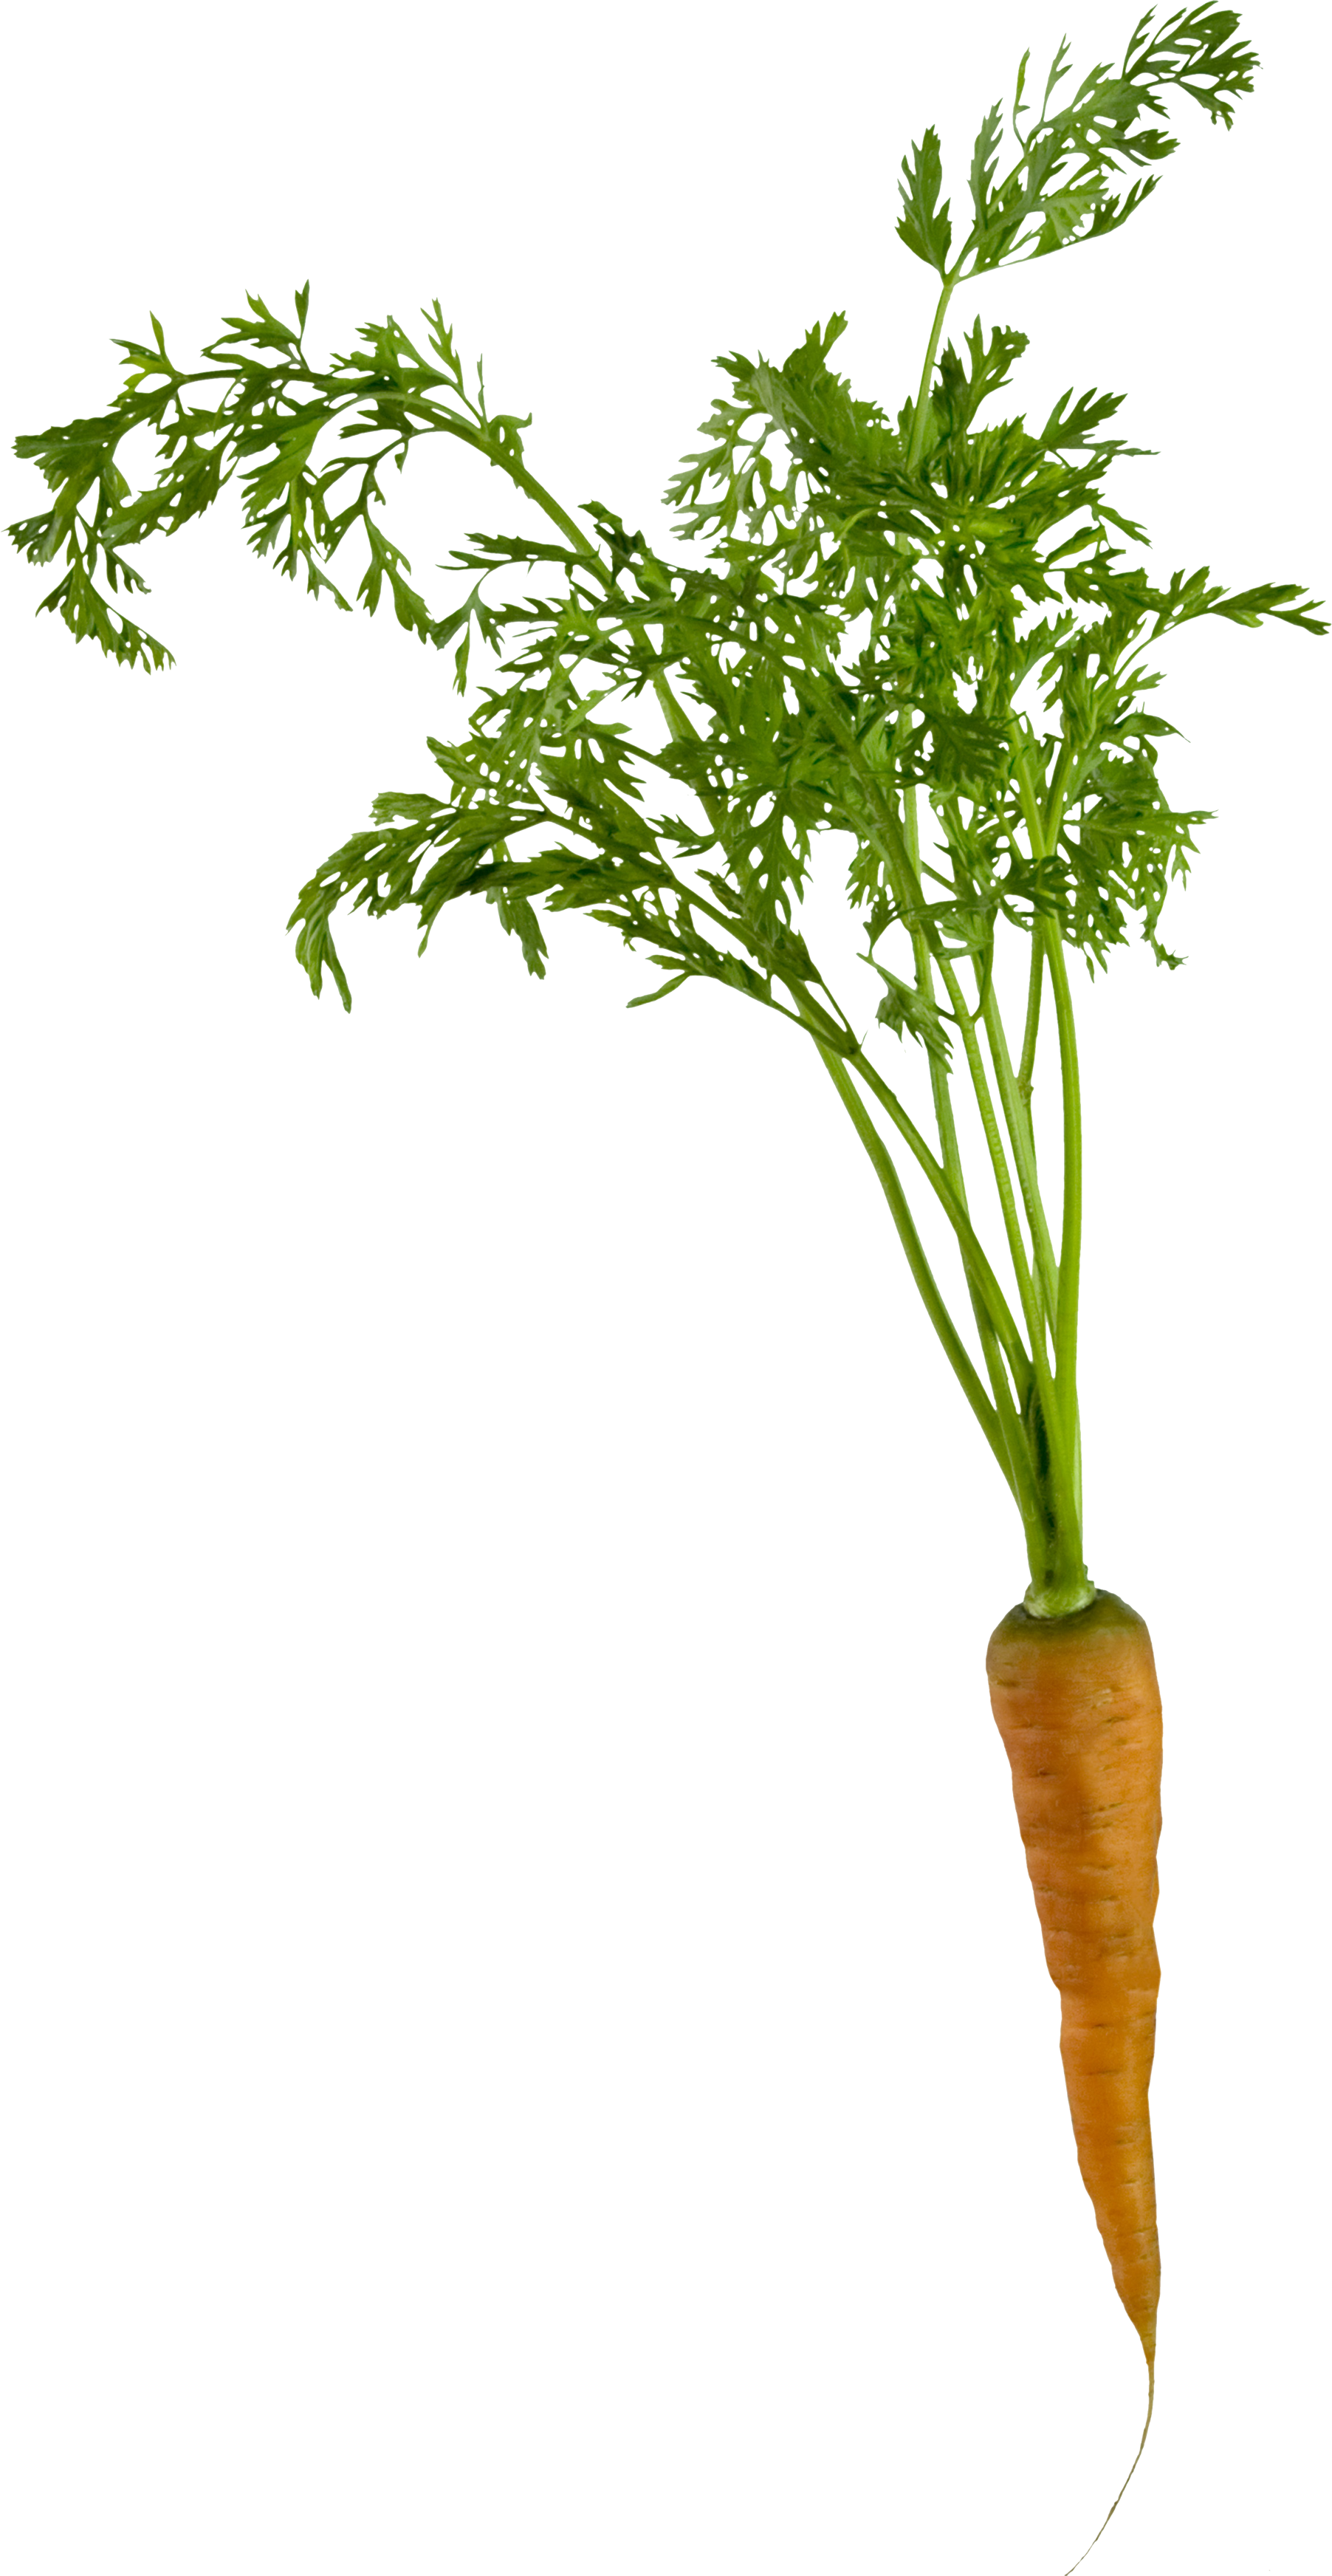 Carrot PNG images